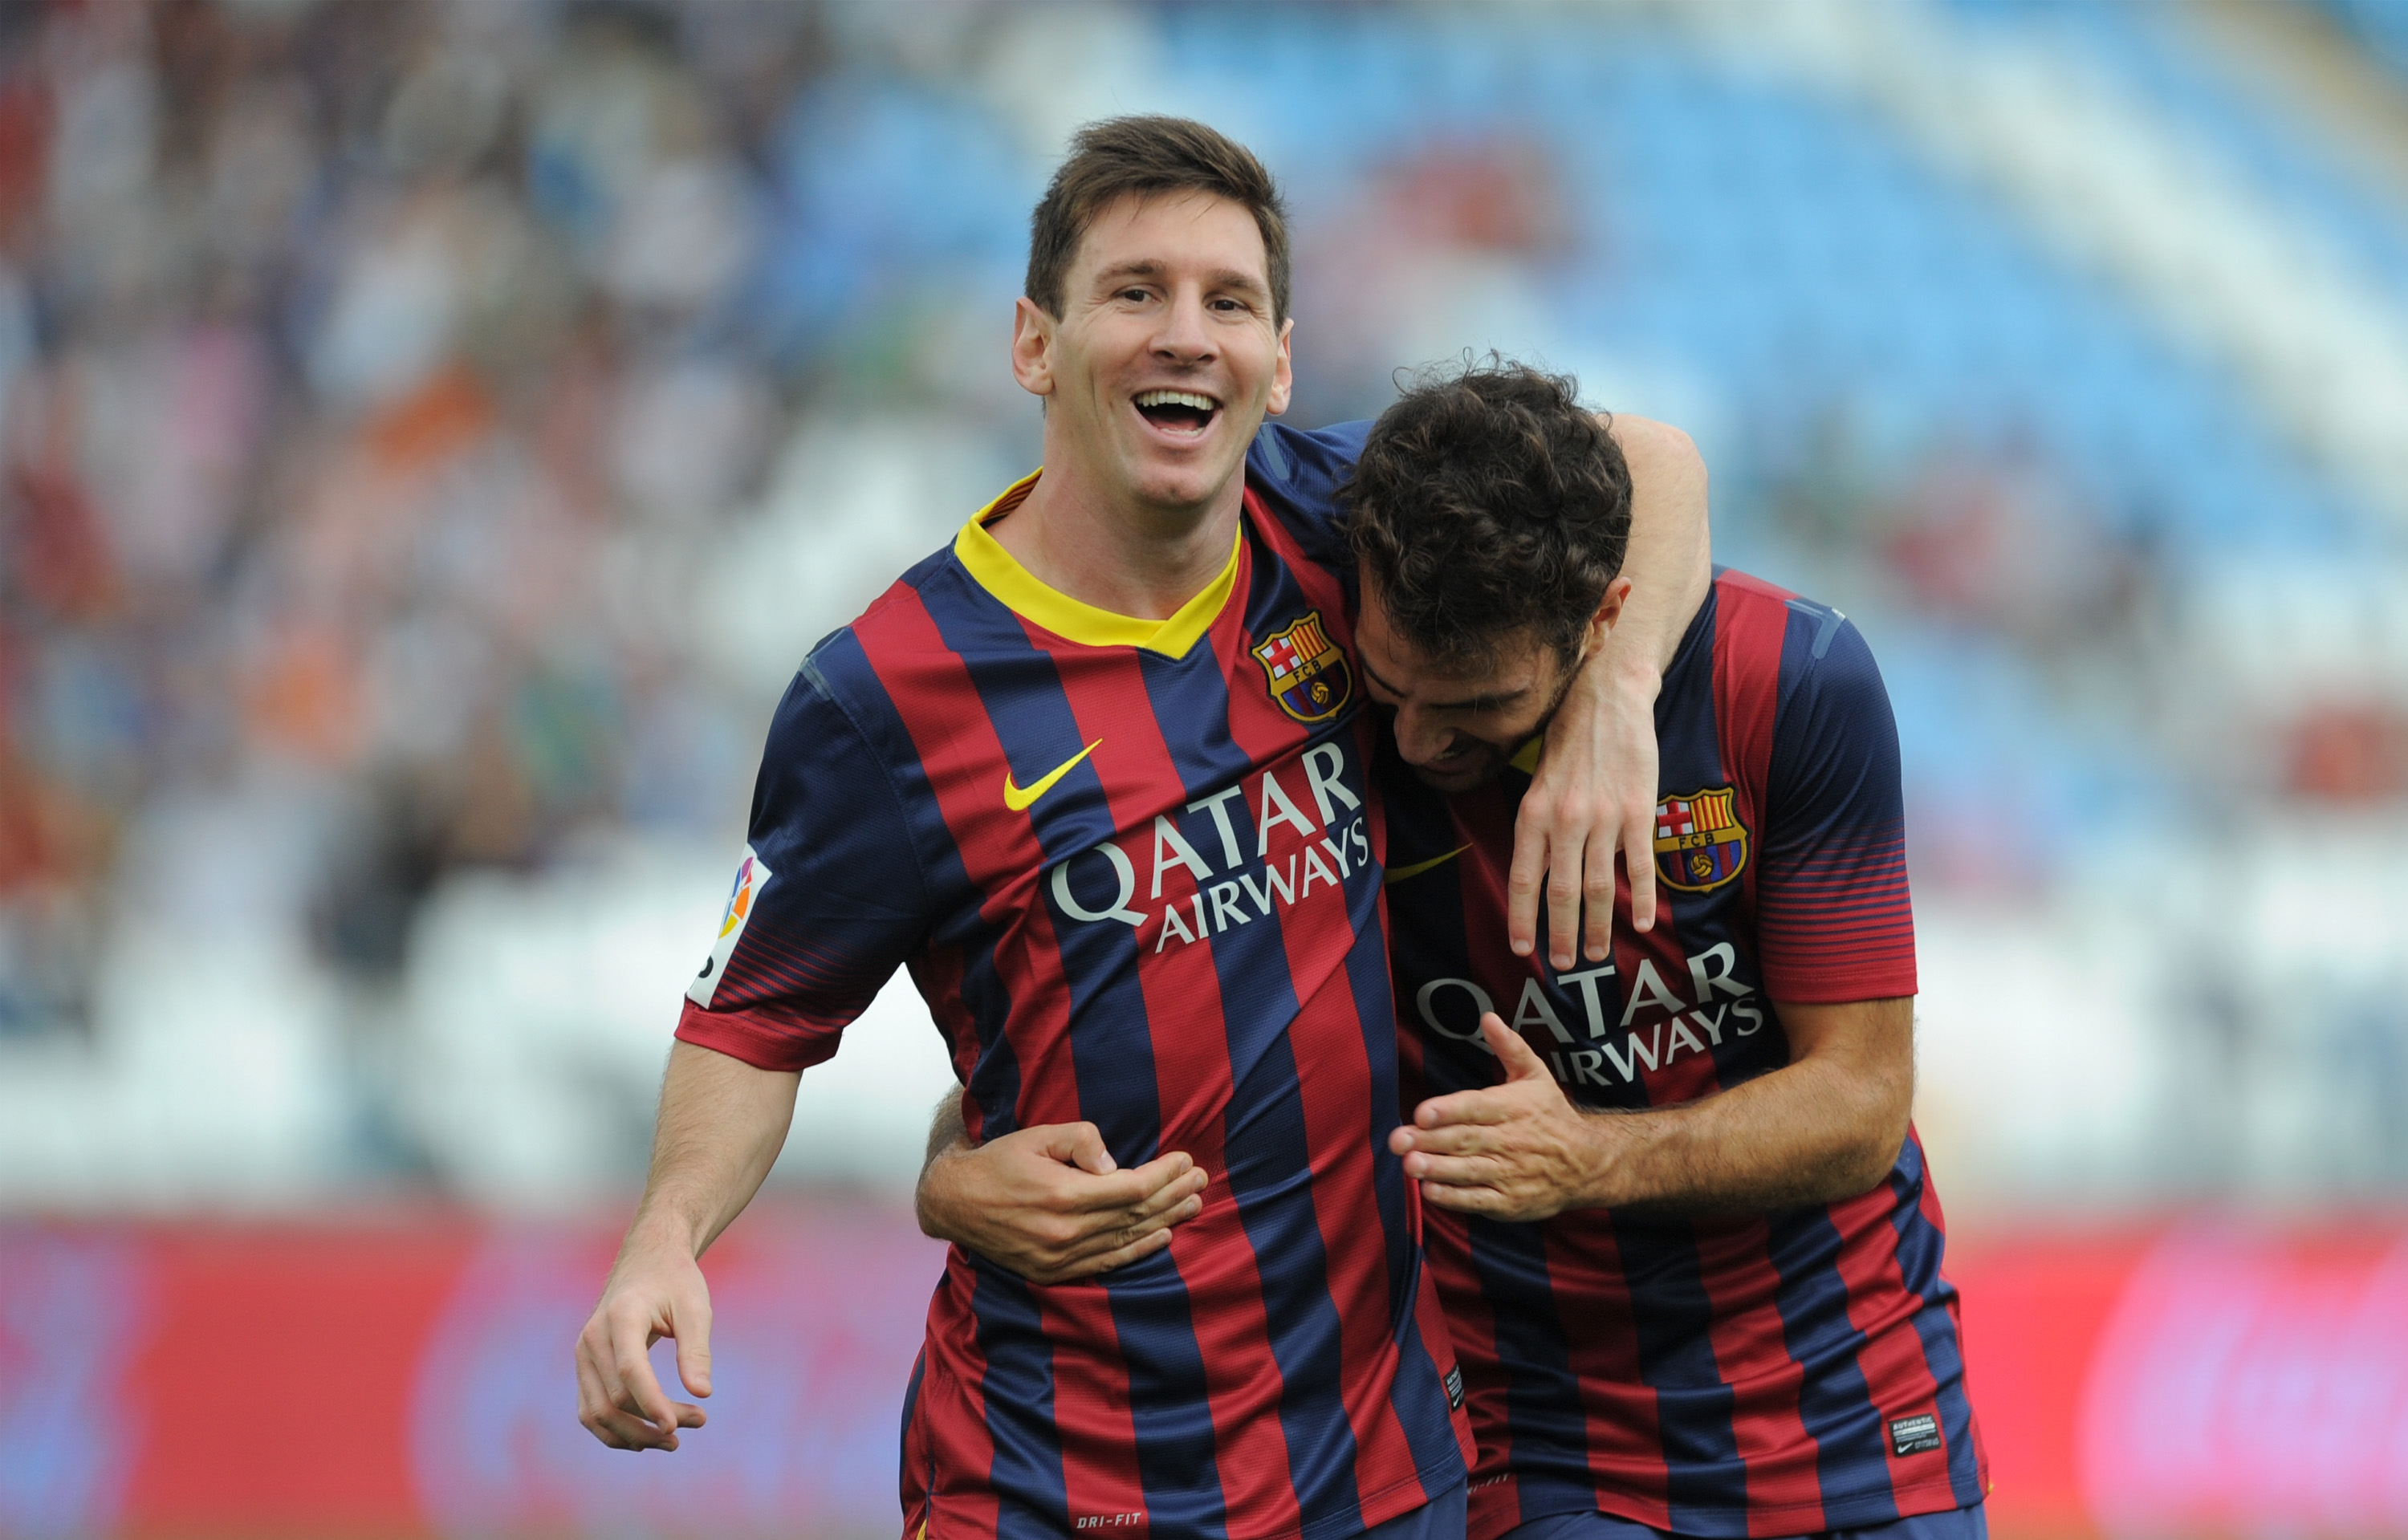 ALMERIA, SPAIN - SEPTEMBER 28:  Lionel Messi (L) celebrates with Cesc Fabregas
 after scoring FC Barcelona's opening goal during the La Liga match between UD Almeria and FC Barcelona on September 28, 2013 in Almeria, Spain.  (Photo by Denis Doyle/Getty Images)